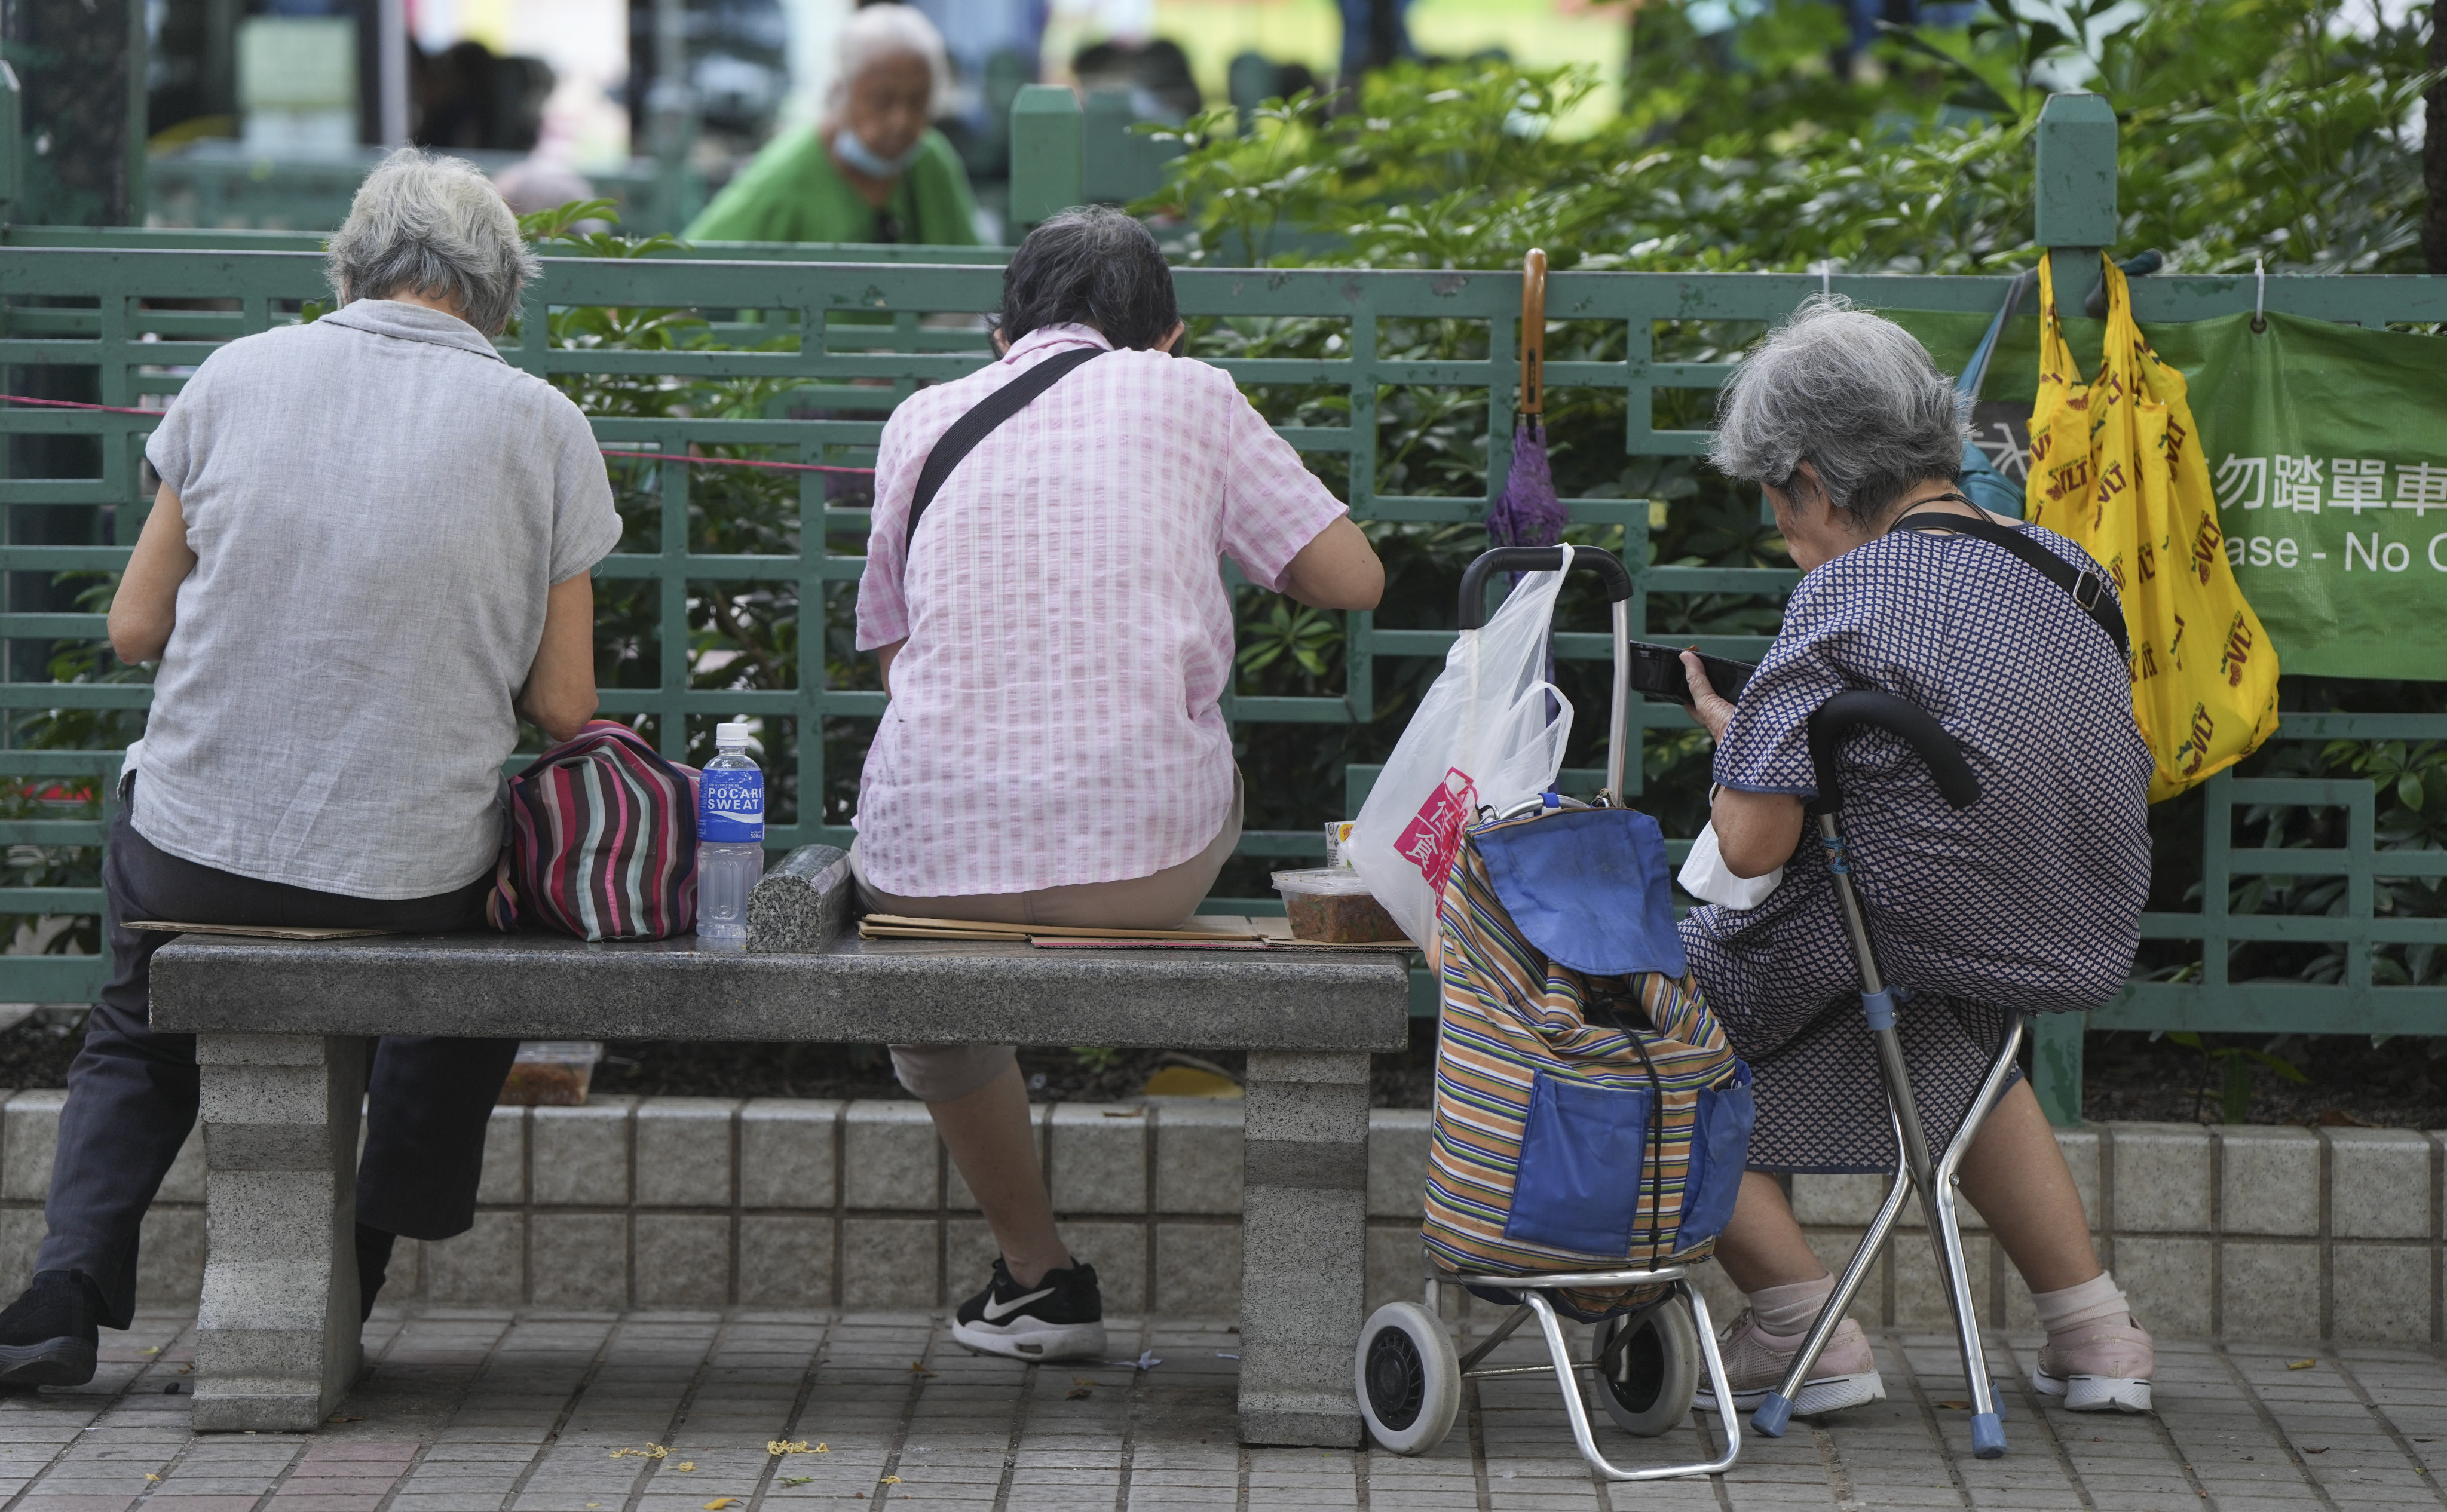 Experts say more outings and group activities can help residents in care homes for the elderly avoid conflicts that can lead to deaths. Photo: Sam Tsang